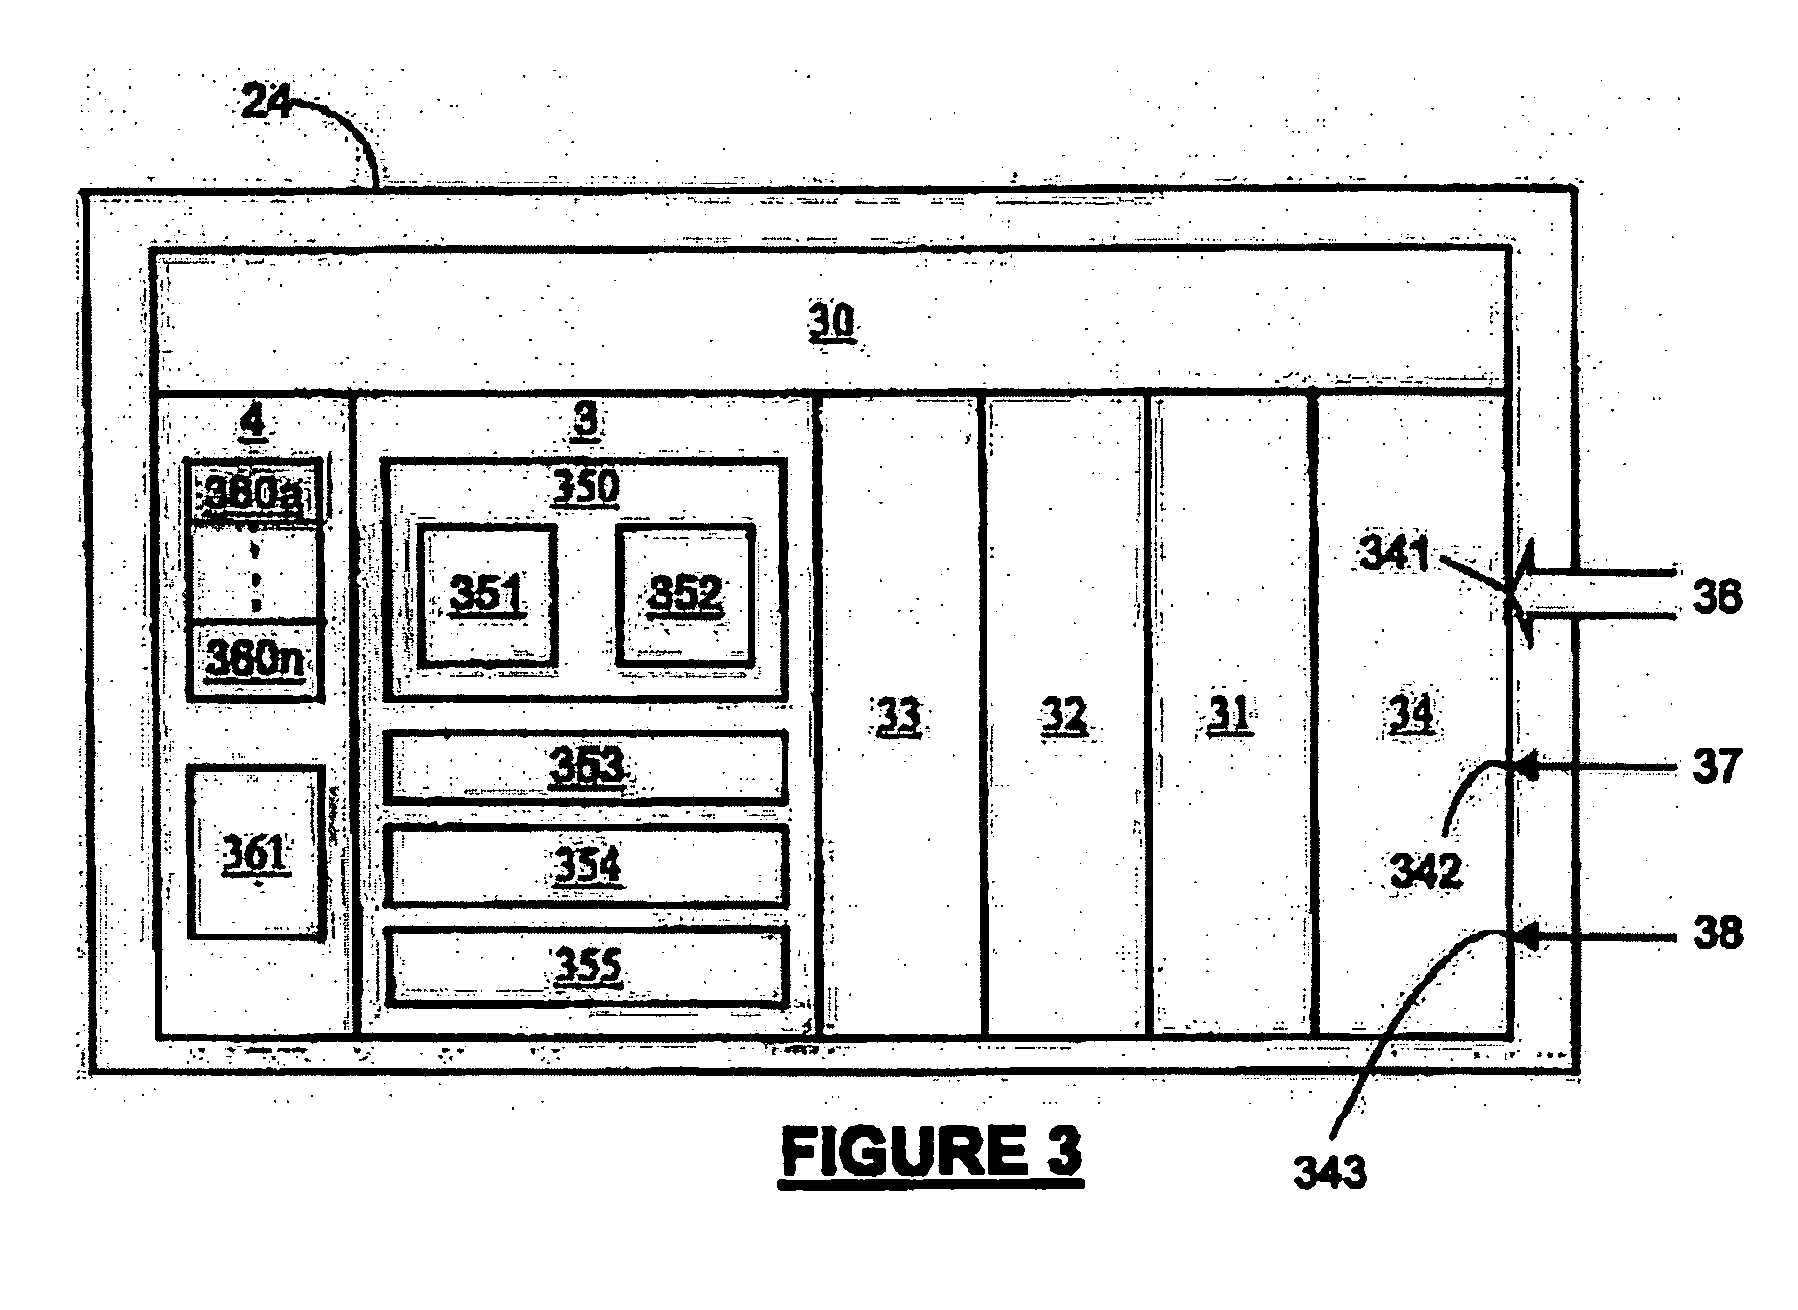 Provision of commands to computing apparatus